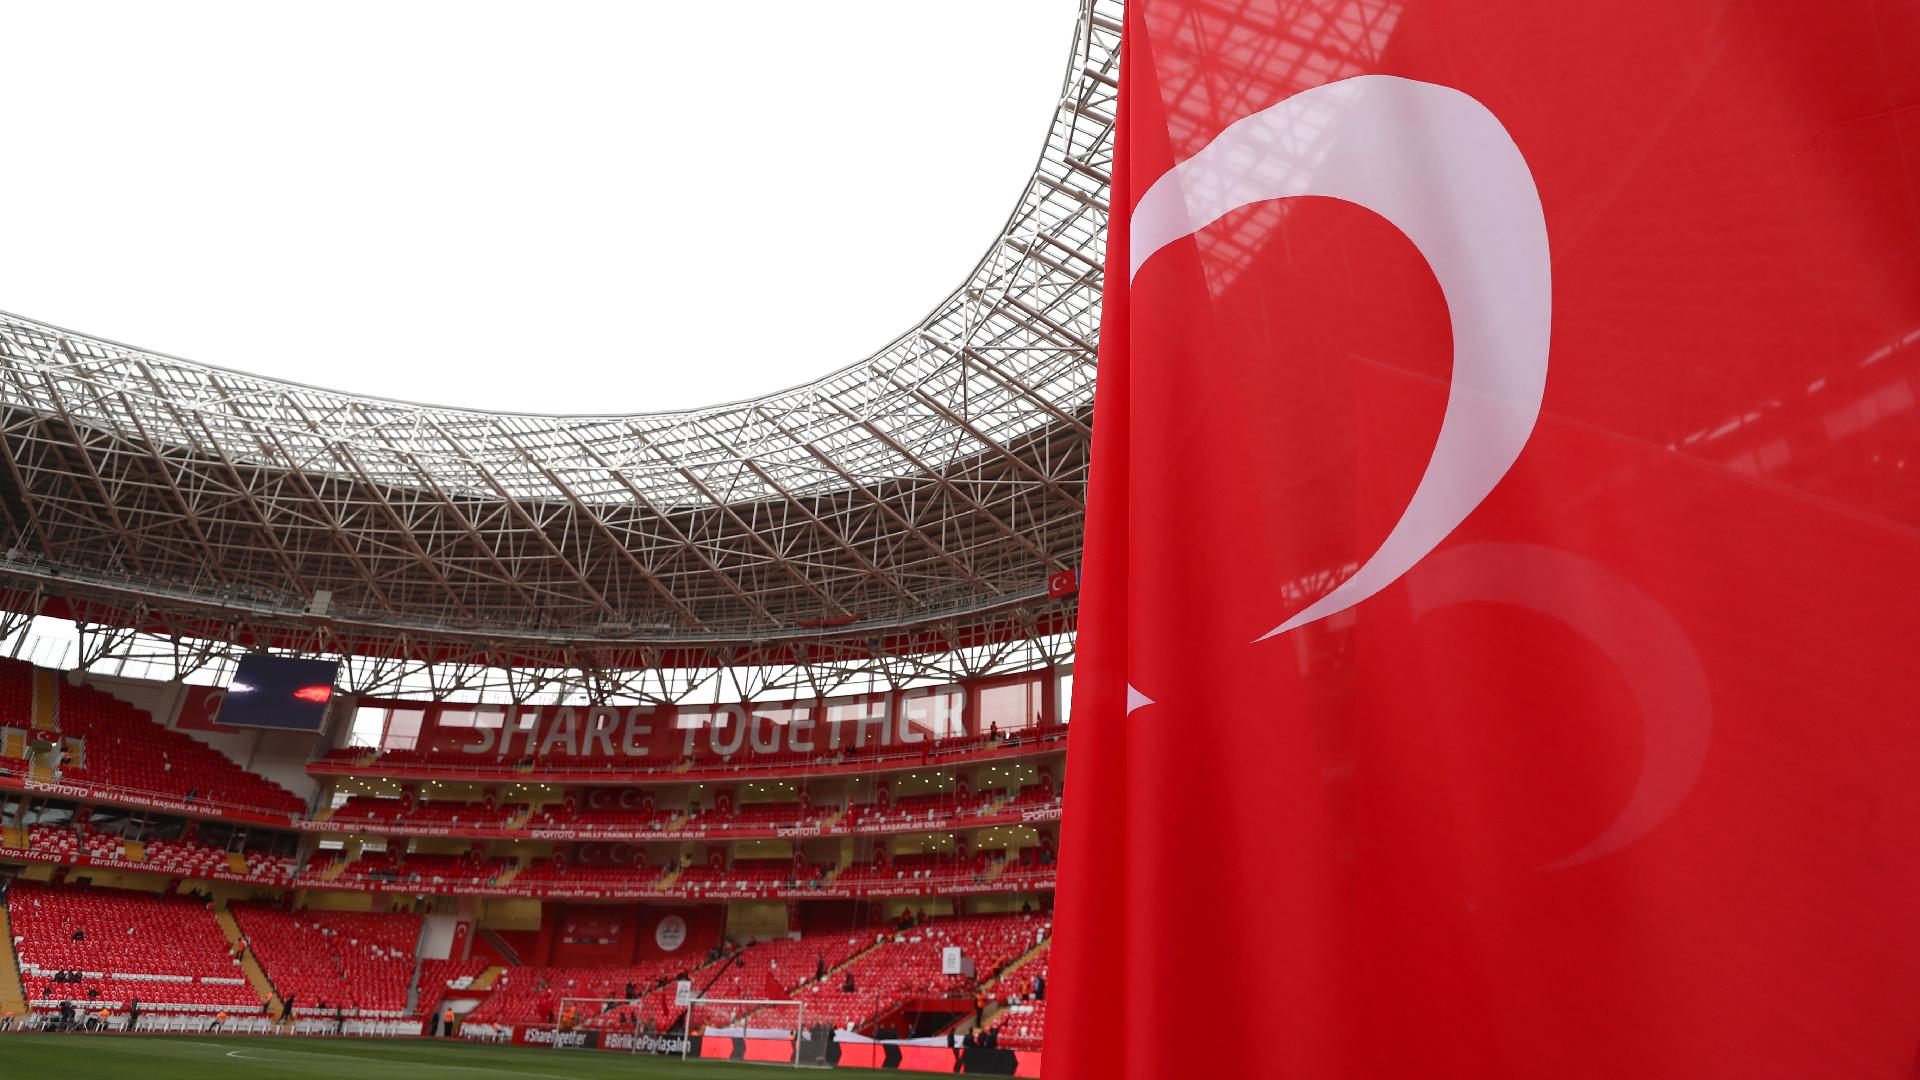 Fresh controversy in Turkey as Istanbulspor leave pitch in apparent protest